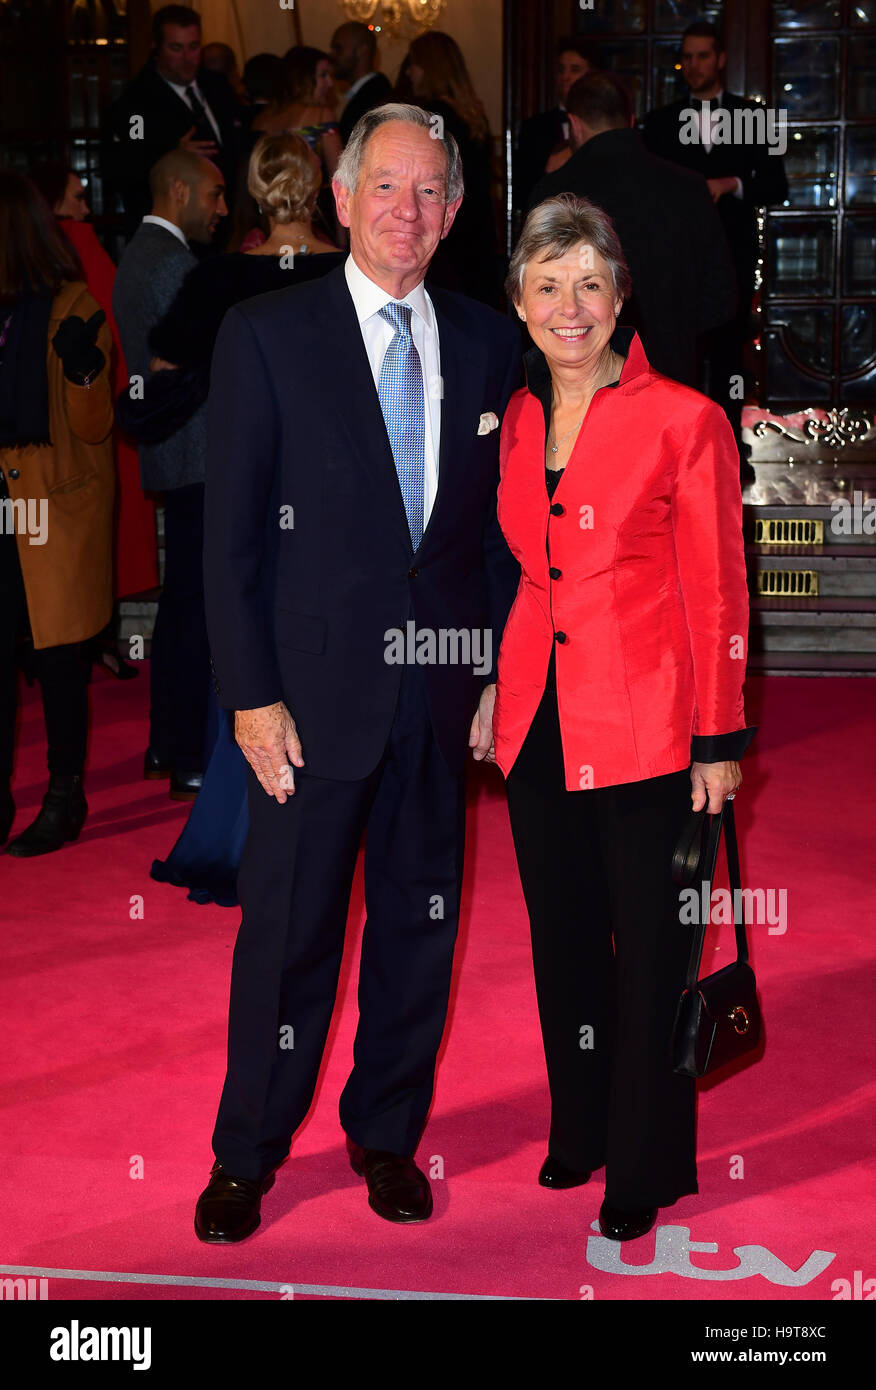 Michael Buerk and Christine Buerk attending the ITV Gala at the London Palladium. PRESS ASSOCIATION Photo. Picture date: Thursday November 24, 2016. See PA story SHOWBIZ Gala. Photo credit should read: Ian West/PA Wire Stock Photo